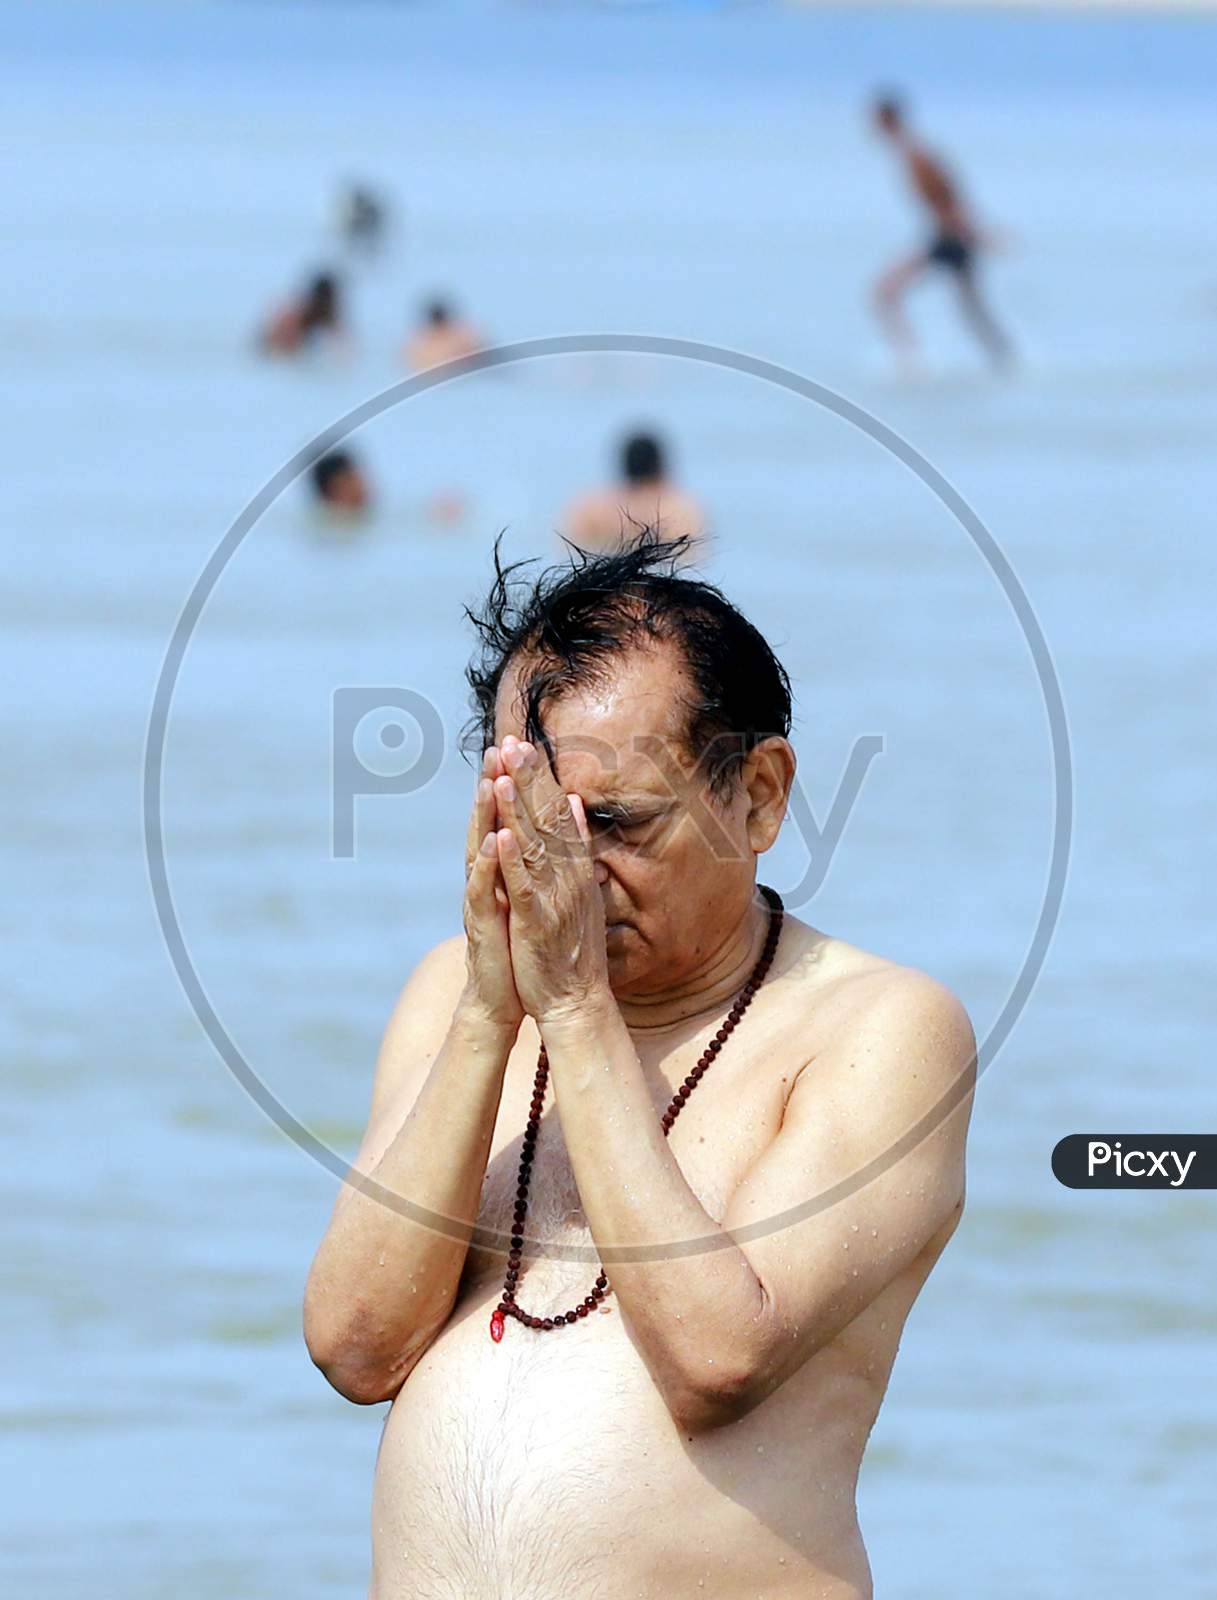 Hindu Devotee Offering Prayers To Holy River Triveni Sangam After Holy Dip  In Prayagraj On May 30,2020